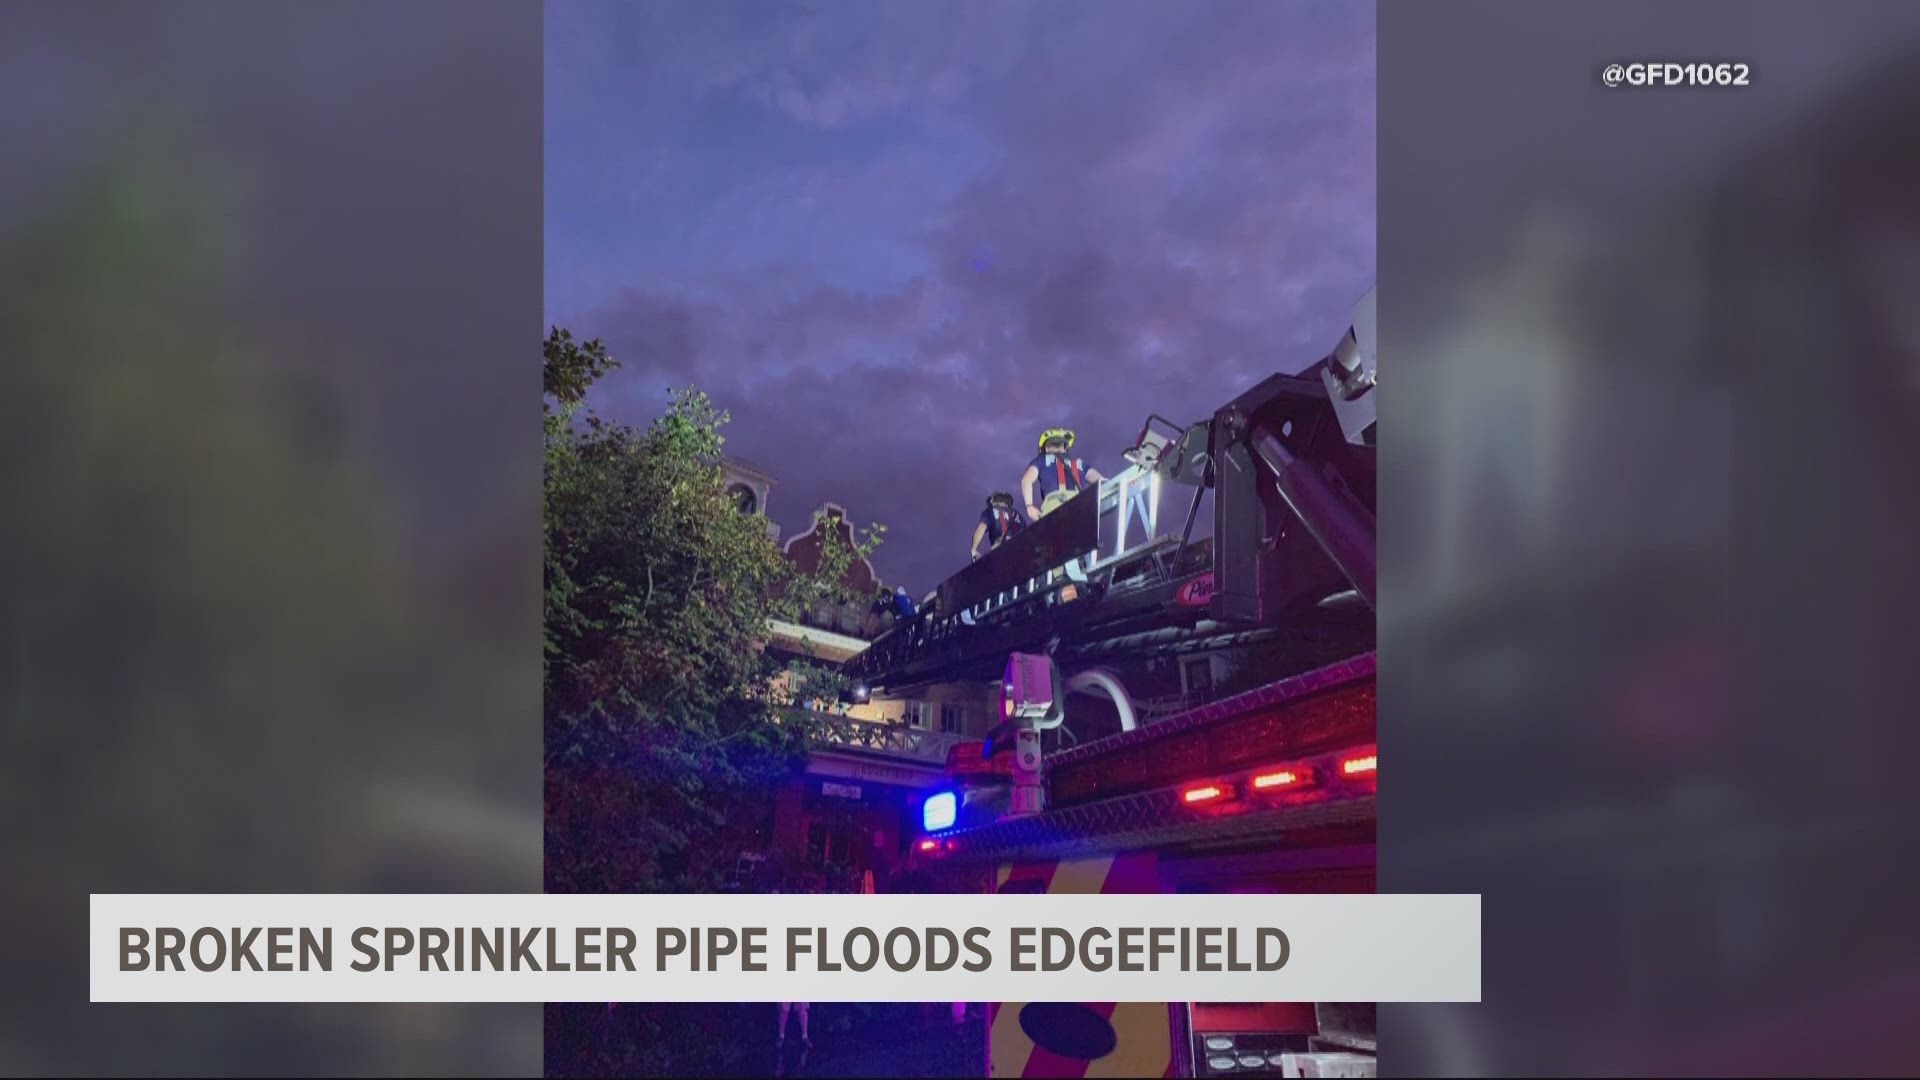 Almost 200 people had to leave the McMenamins Edgefield building Wednesday night after pipes burst and caused flooding.